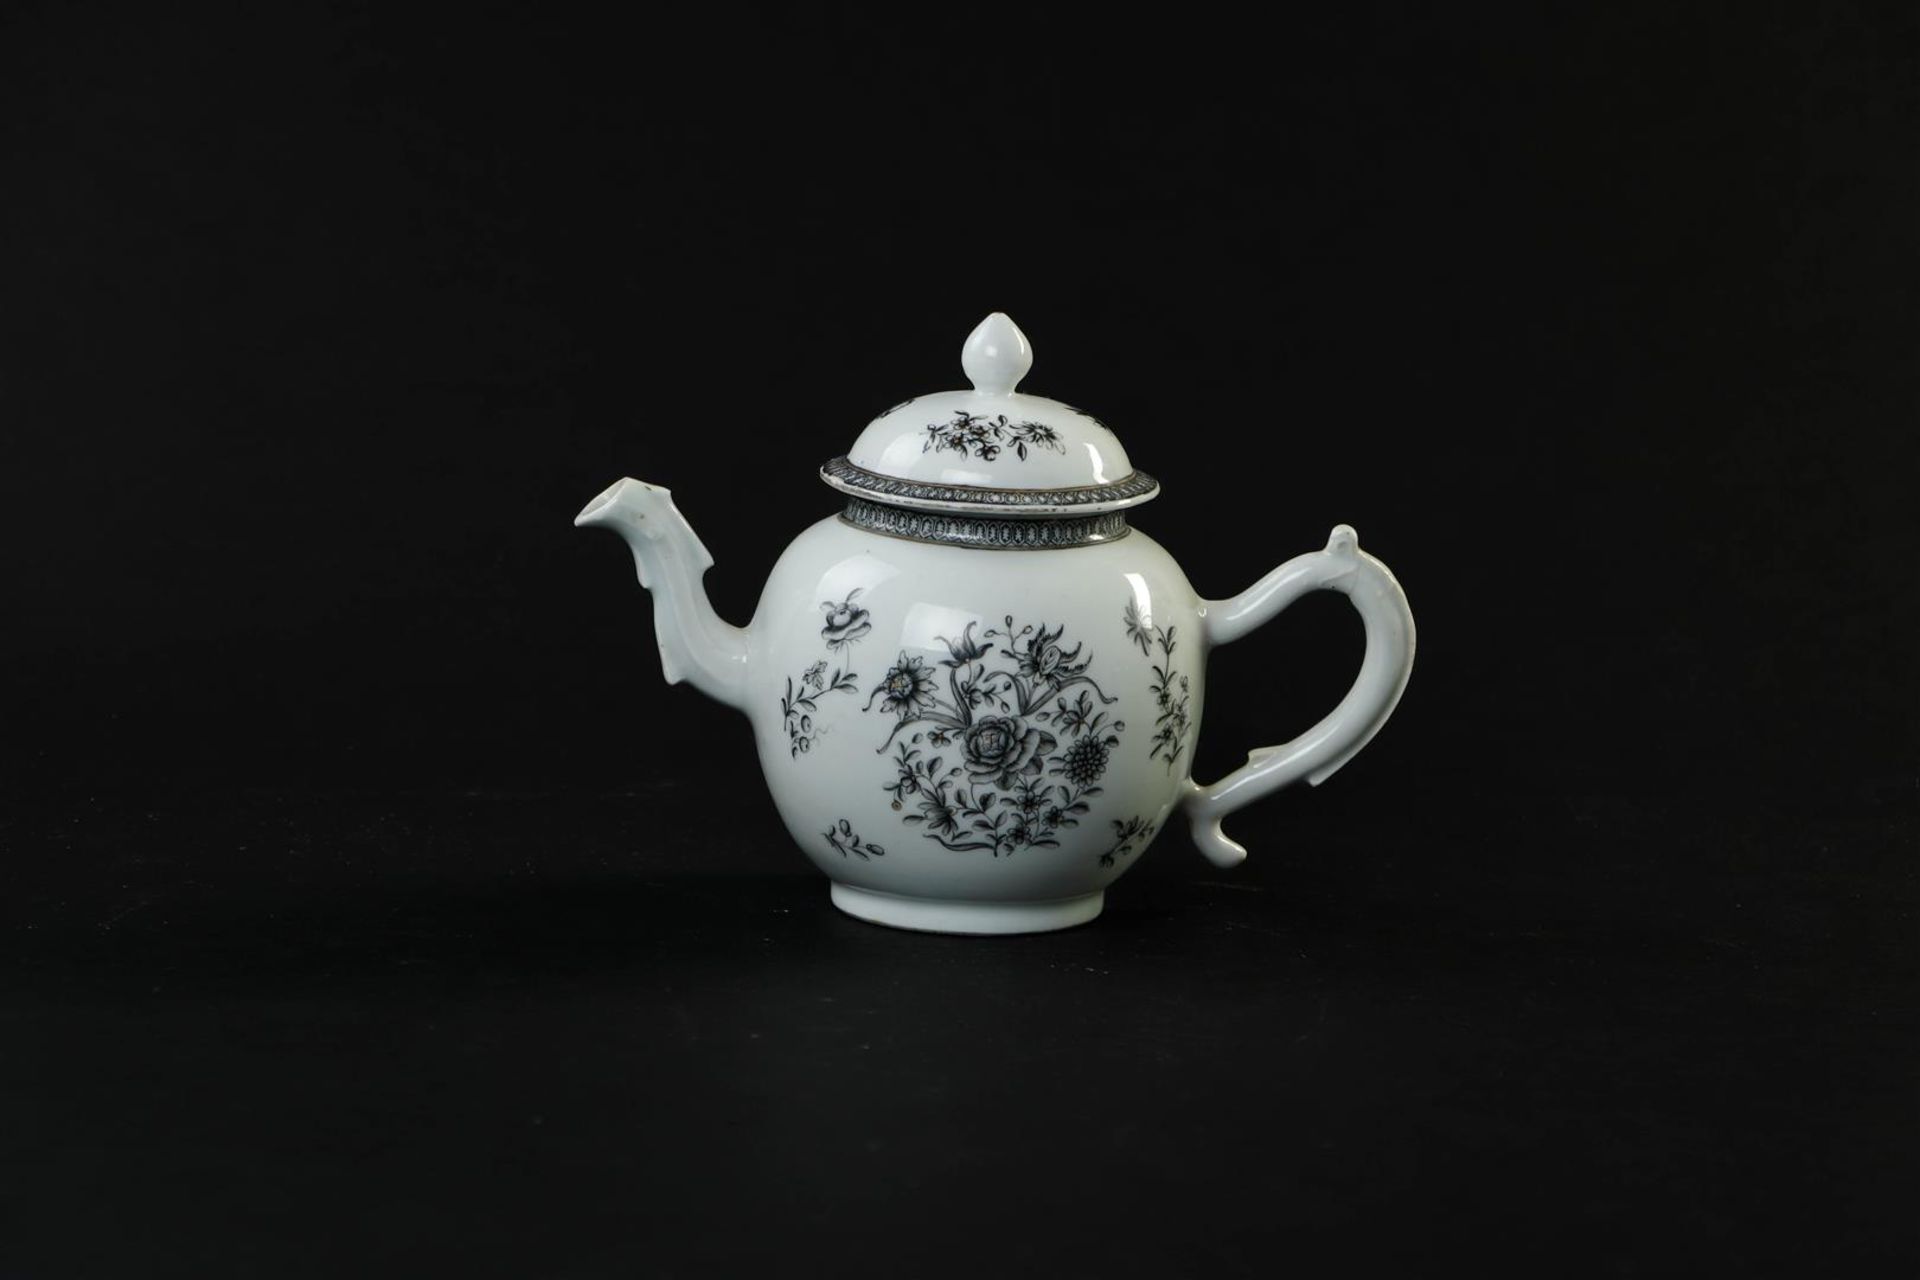 An Encre de Chine tableware set consisting of a teapot, milk jug, tea caddy, patty pan and spoon tra - Image 6 of 24